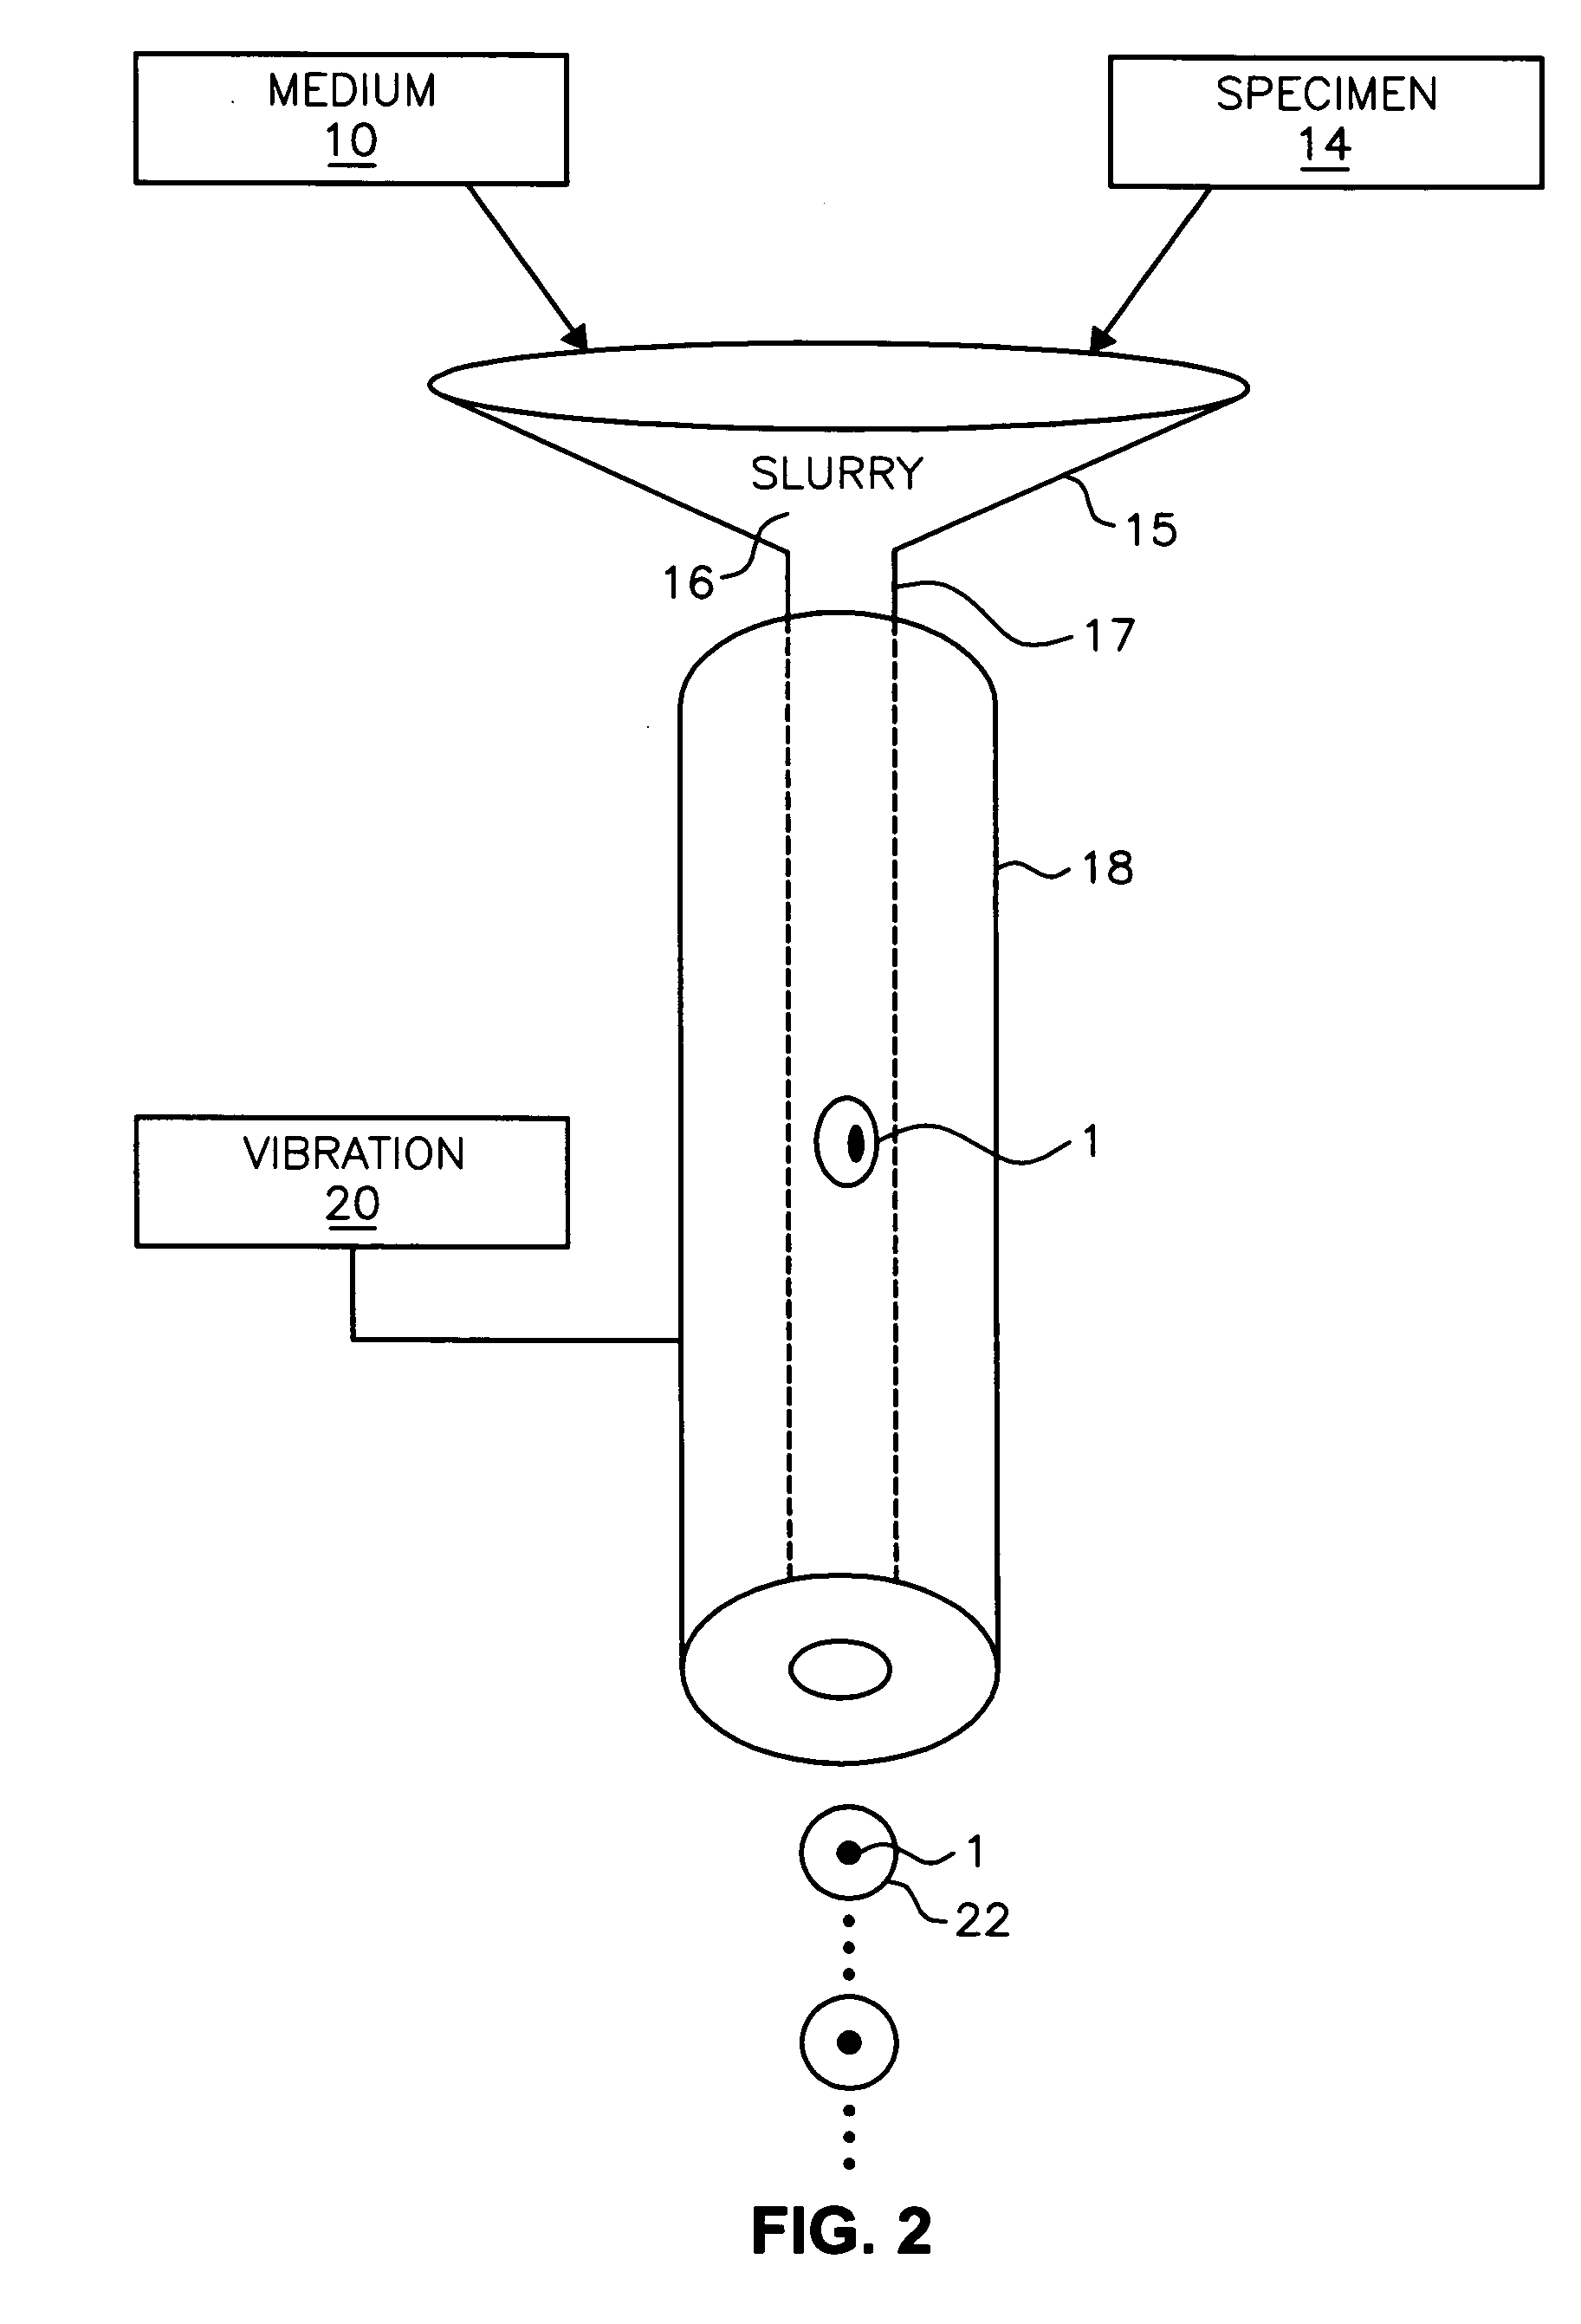 System and method for preparation of cells for 3D image acquisition